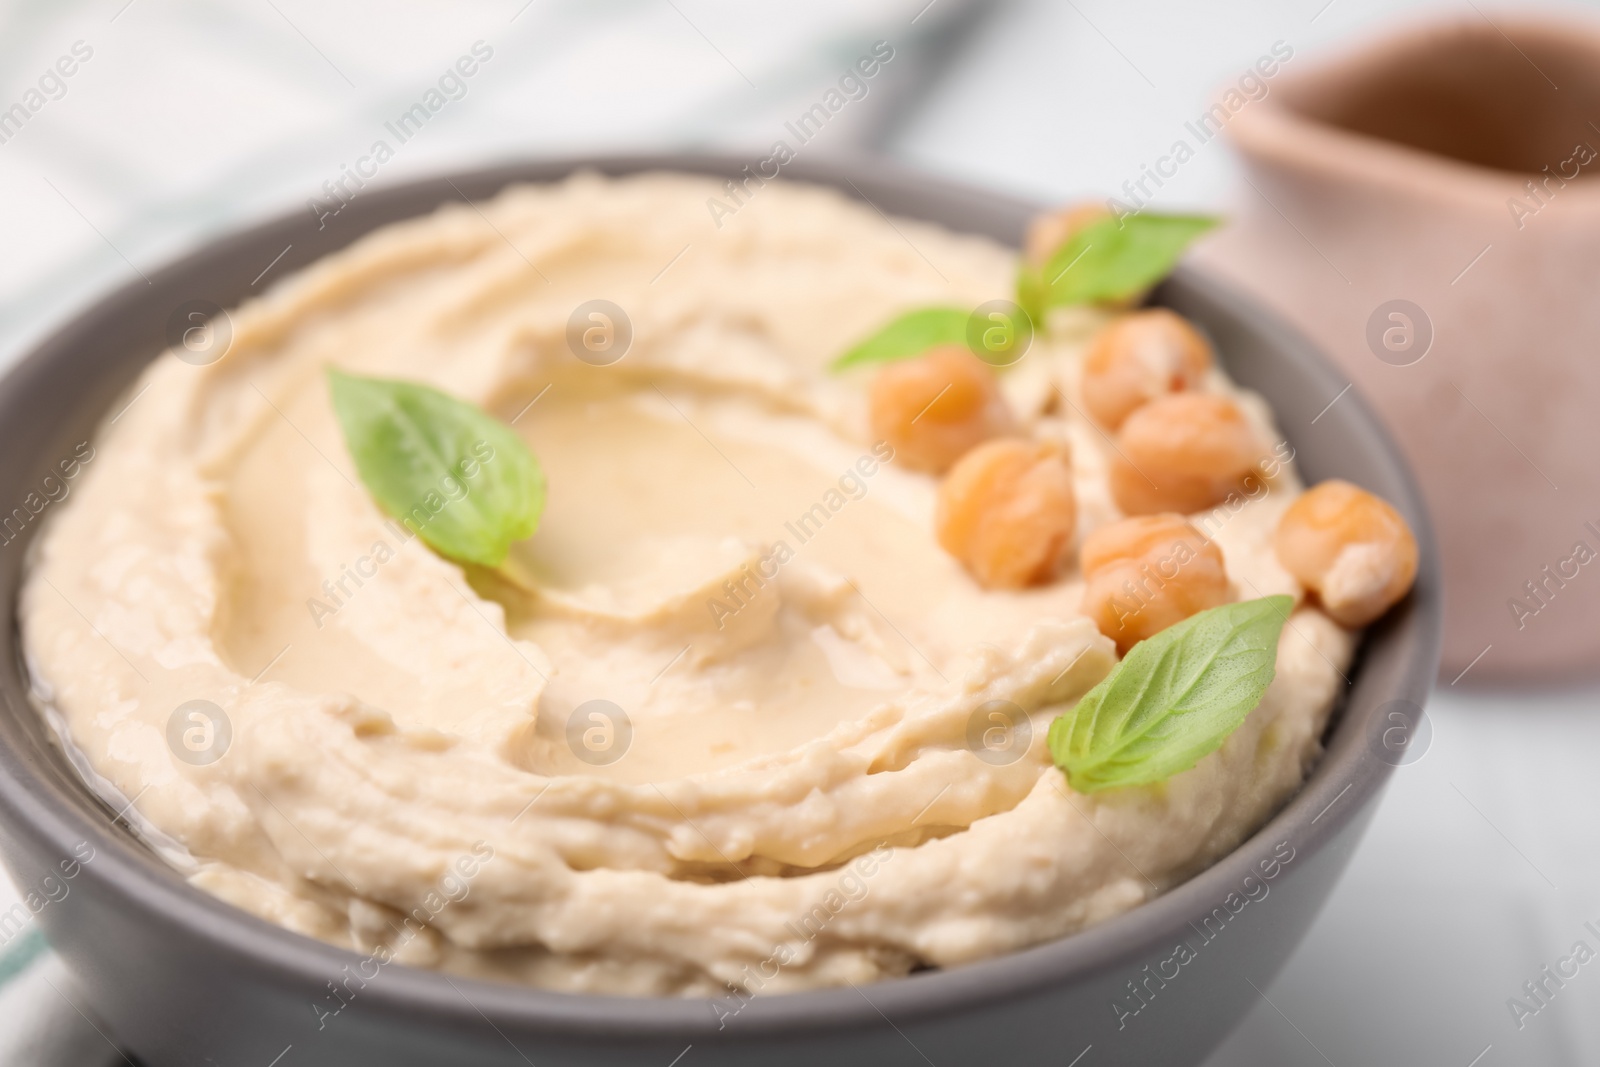 Photo of Delicious hummus with chickpeas served on white tiled table, closeup